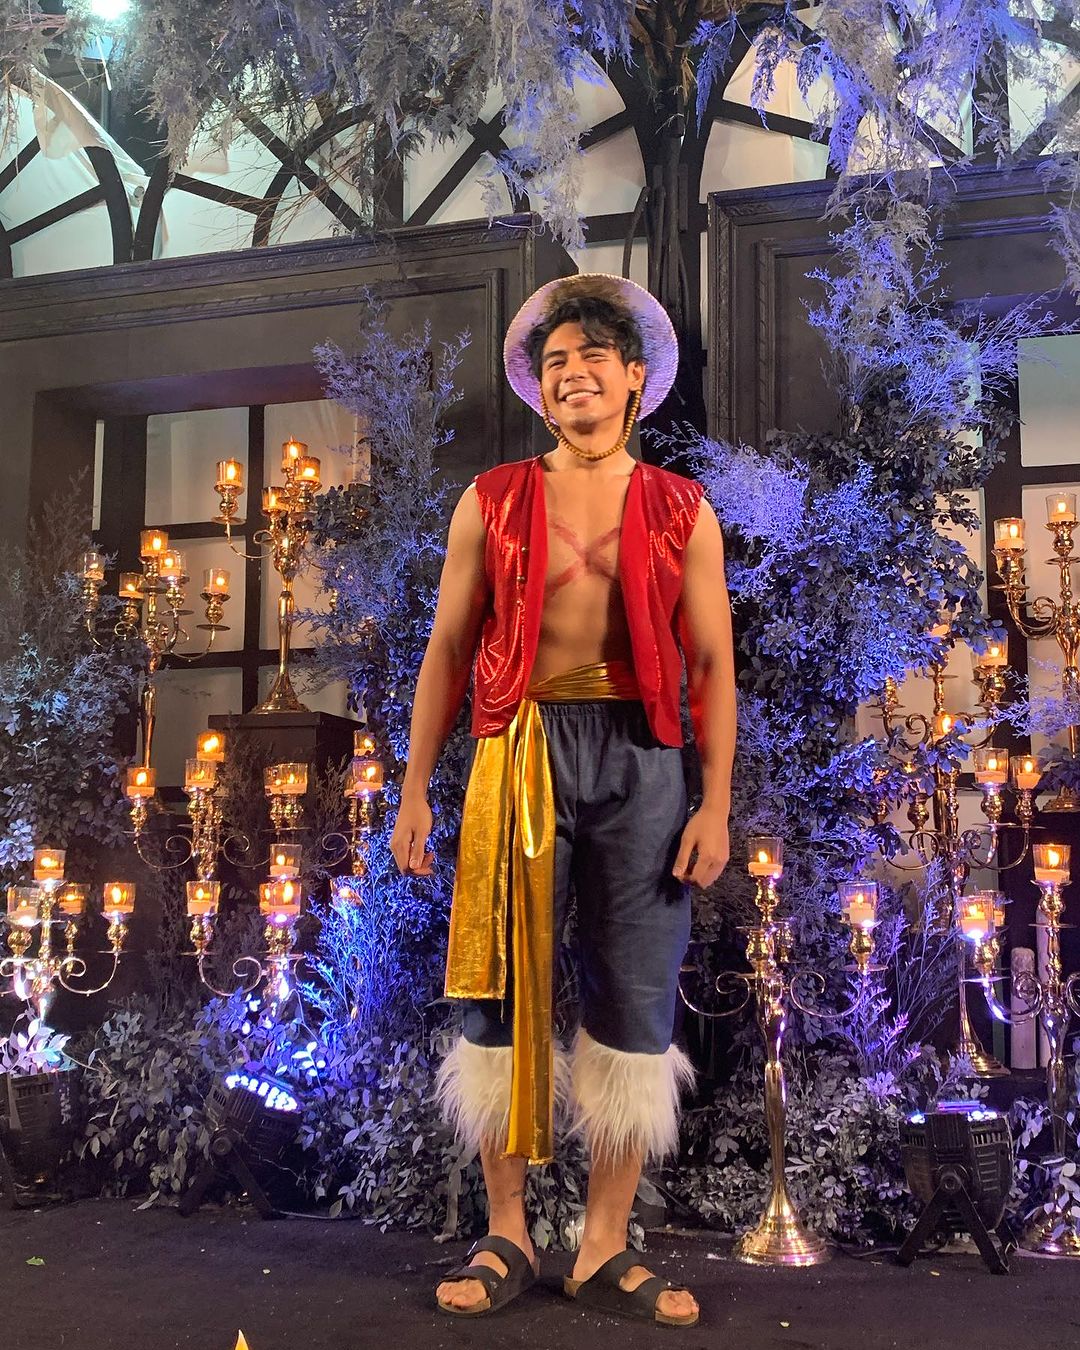 MJ ORDILLANO AS LUFFY FROM ONE PIECE